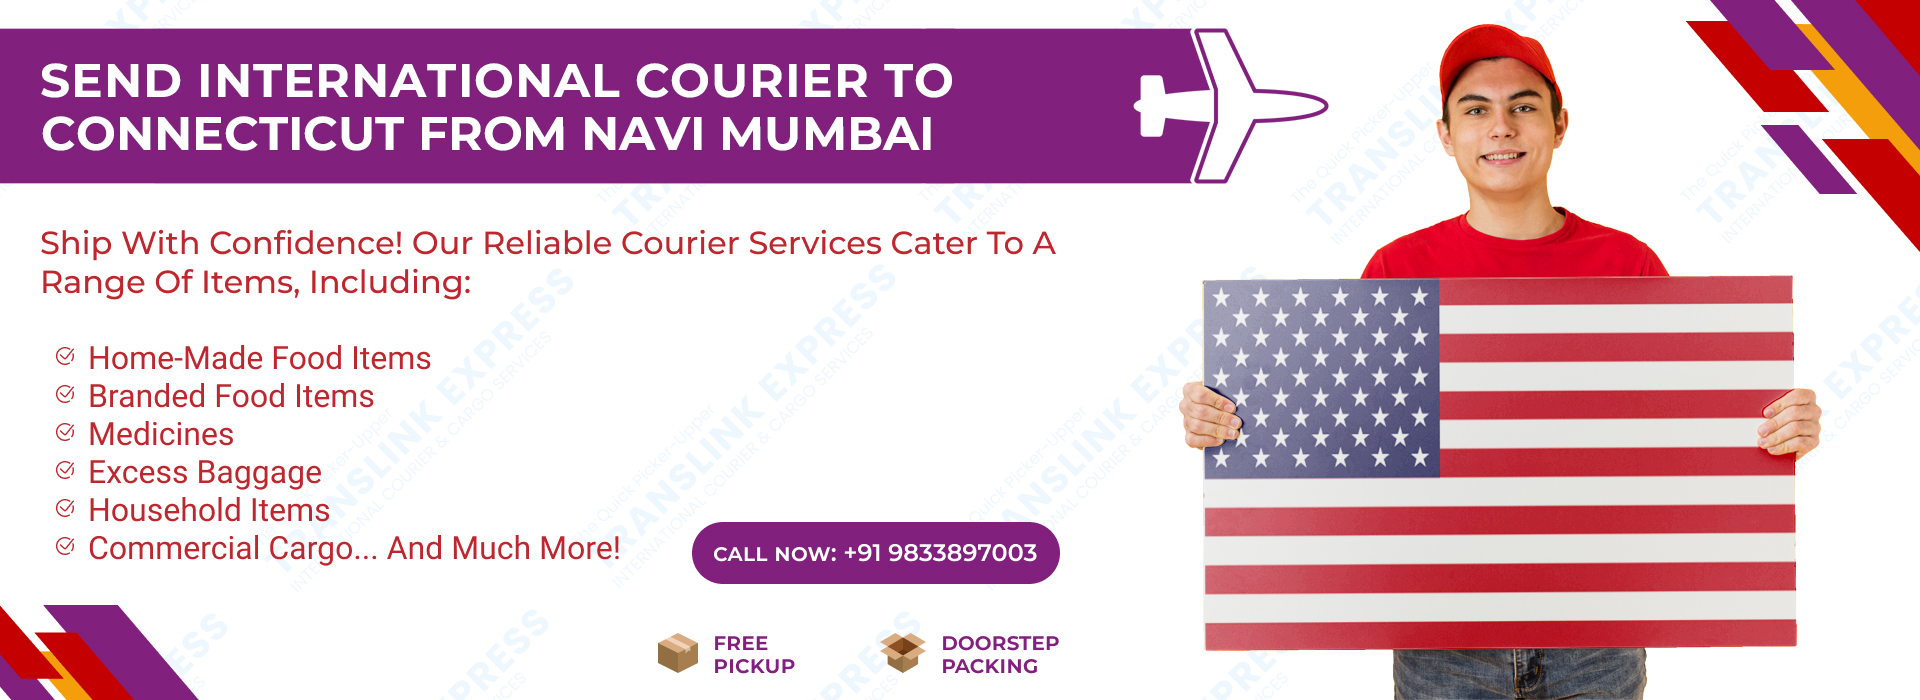 Courier to Connecticut From Navi Mumbai